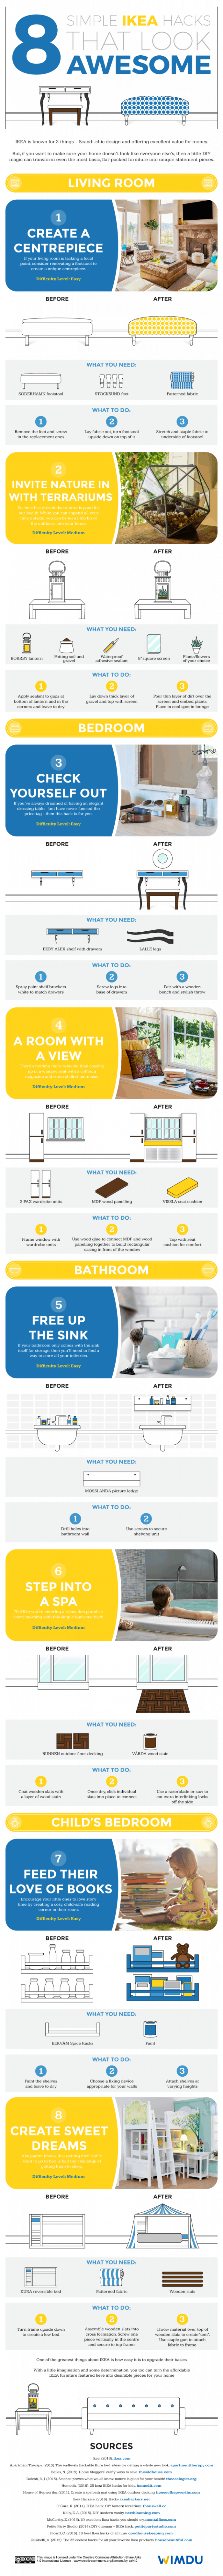 8 Simple but Epic IKEA Hacks Infographic